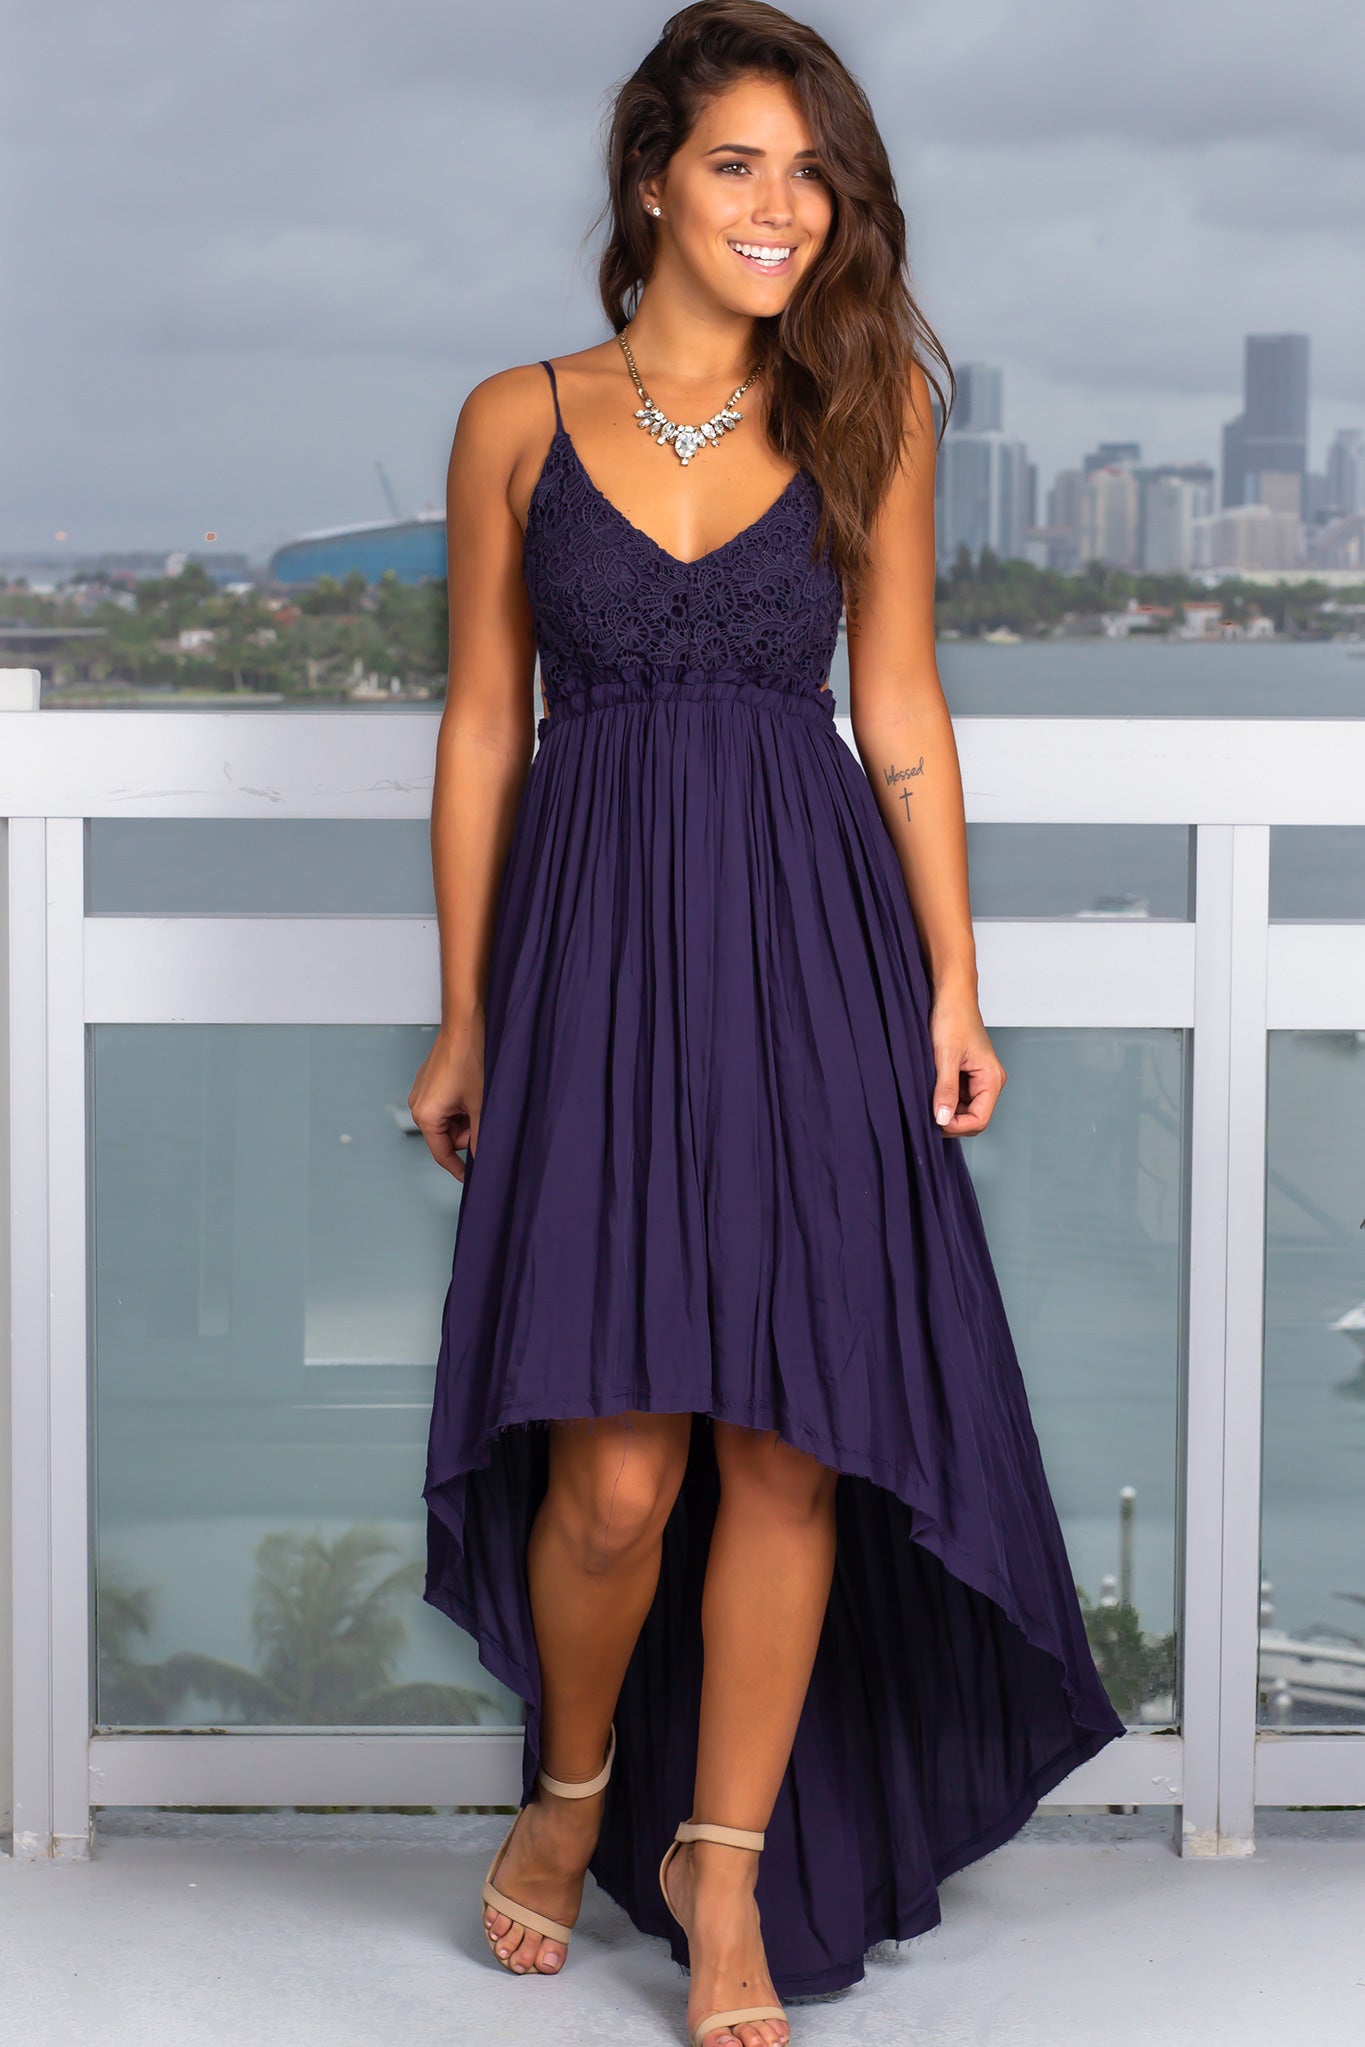 navy high low gown